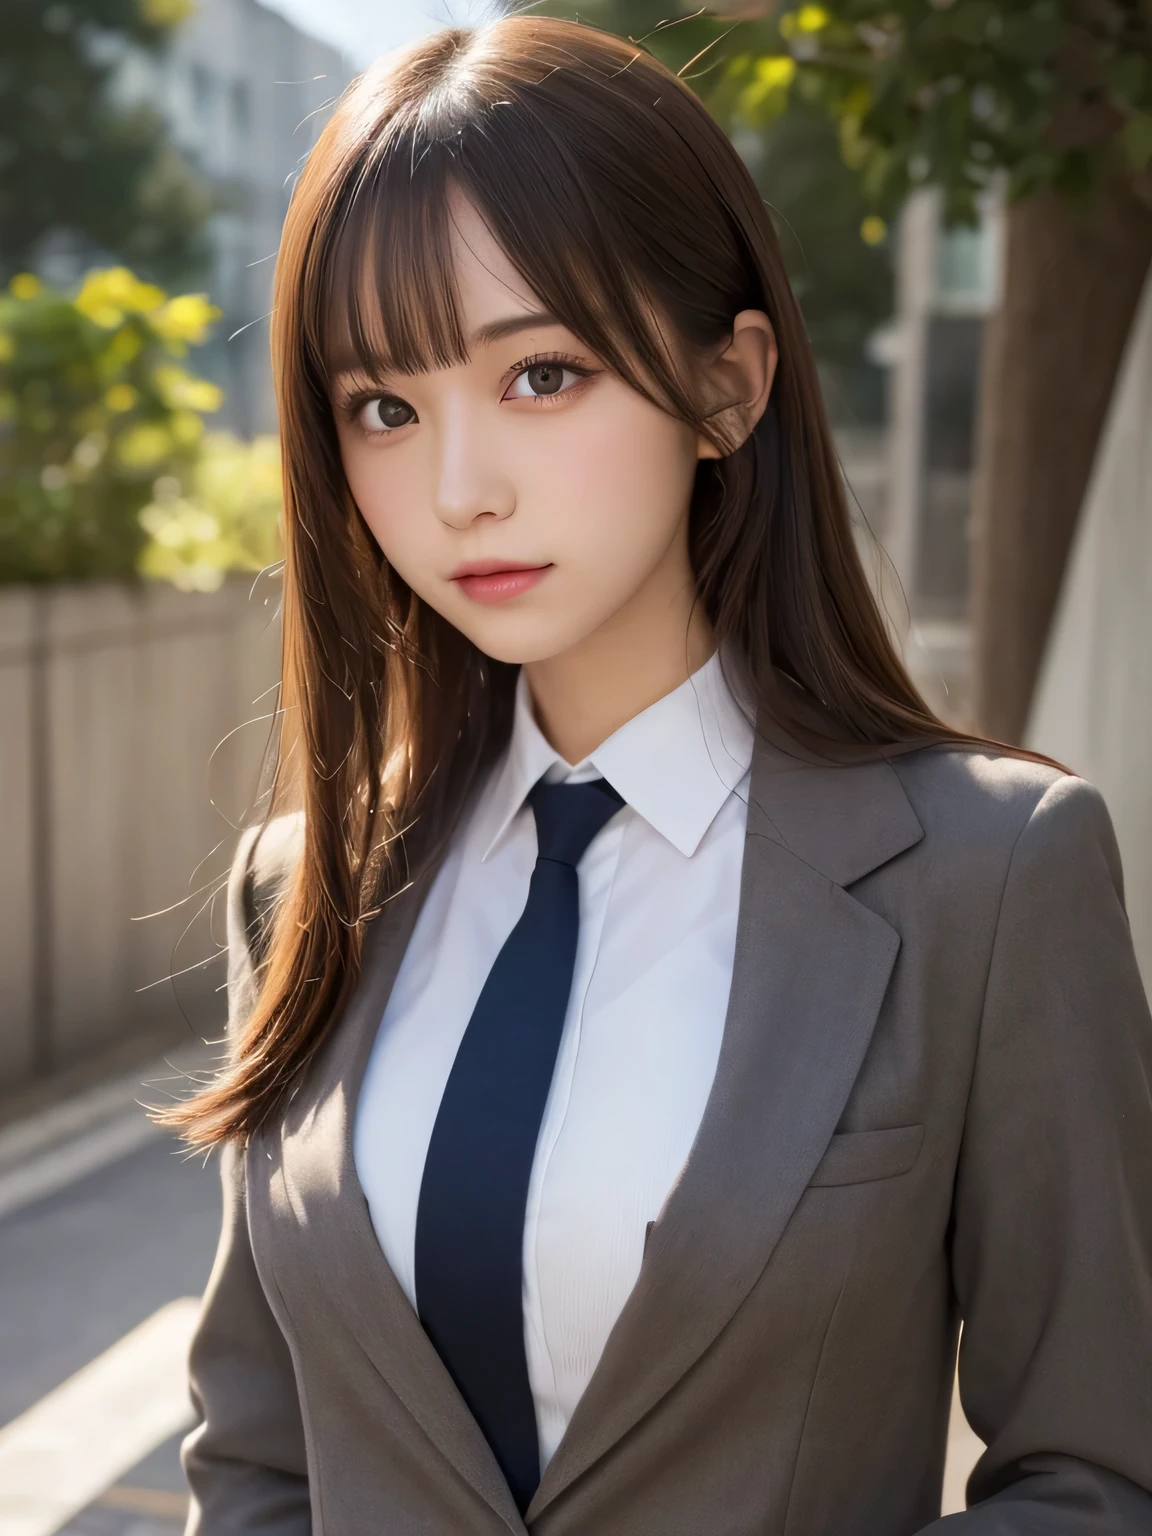 masutepiece, Best Quality, Illustration, Ultra-detailed, finely detail, hight resolution, 8K Wallpaper, Perfect dynamic composition, Beautiful detailed eyes, Natural Lip,Blazer ,School uniform, Big breasts, Full body